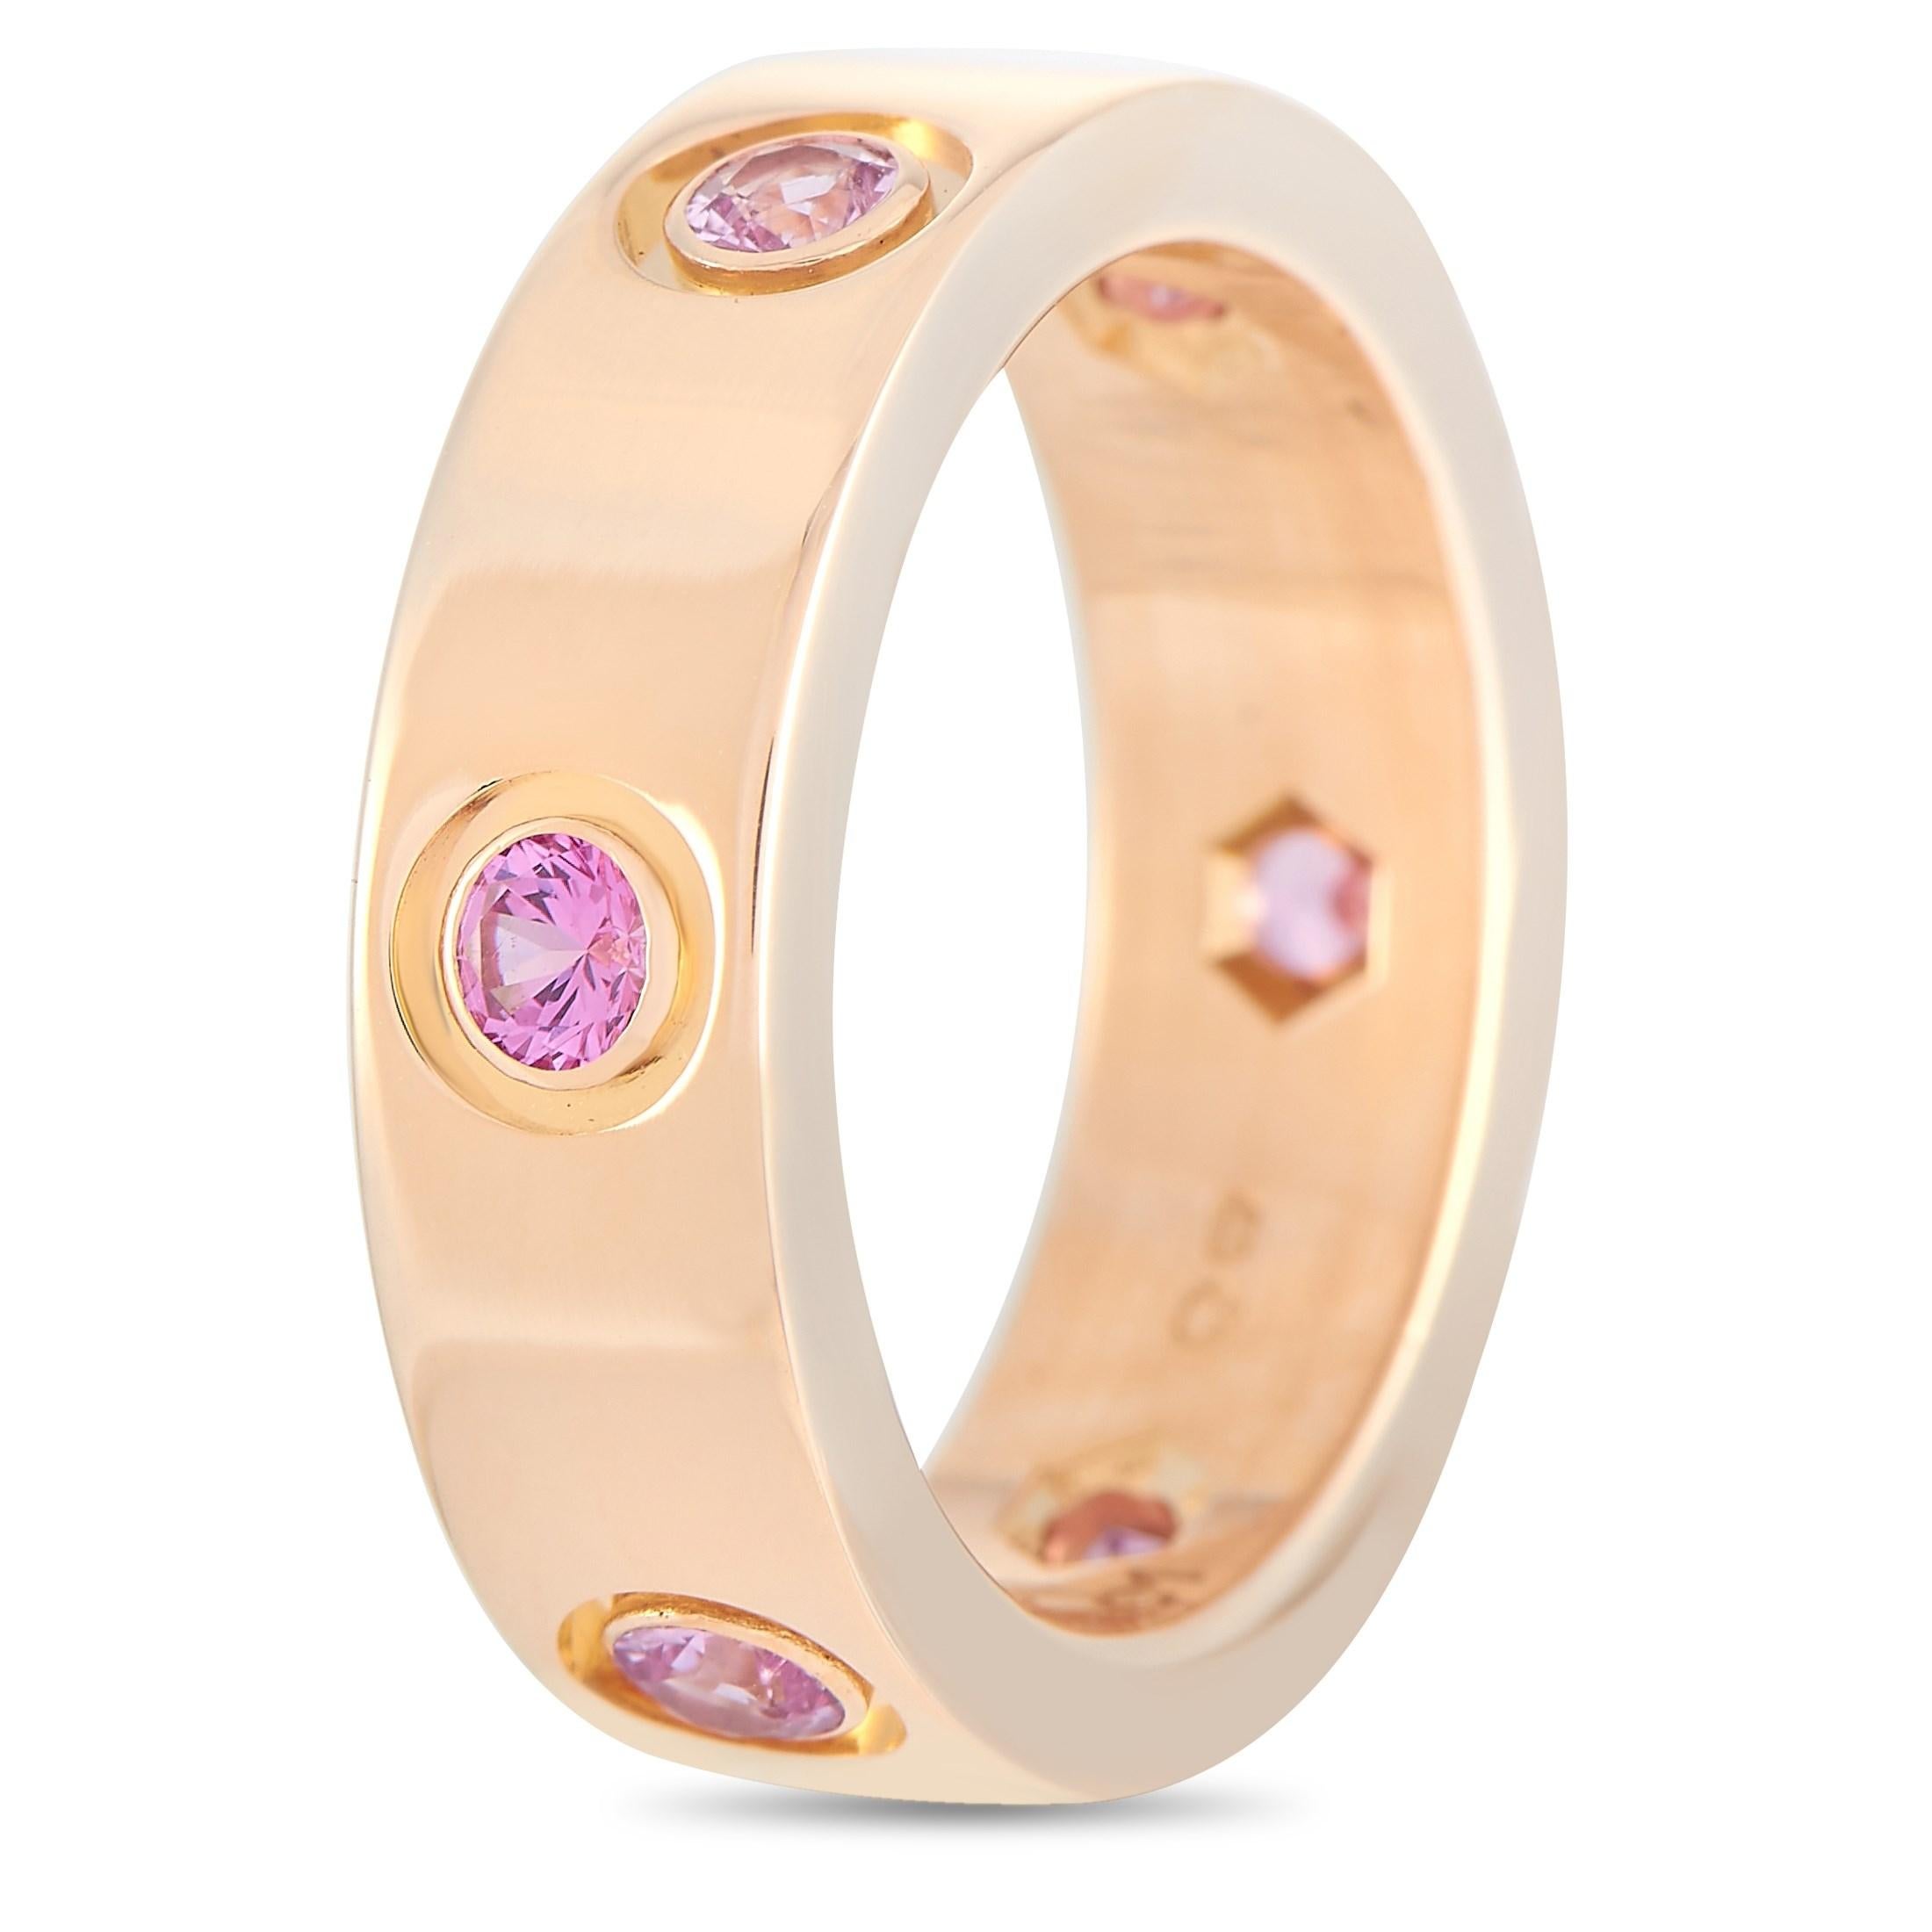 This Cartier Love 18K Rose Gold Pink Sapphire Band Ring is oozing with the signature Cartier style. The band is made with lovely 18K rose gold and set with six round-cut pink sapphires evenly spaced around the ring. The inside of the band is